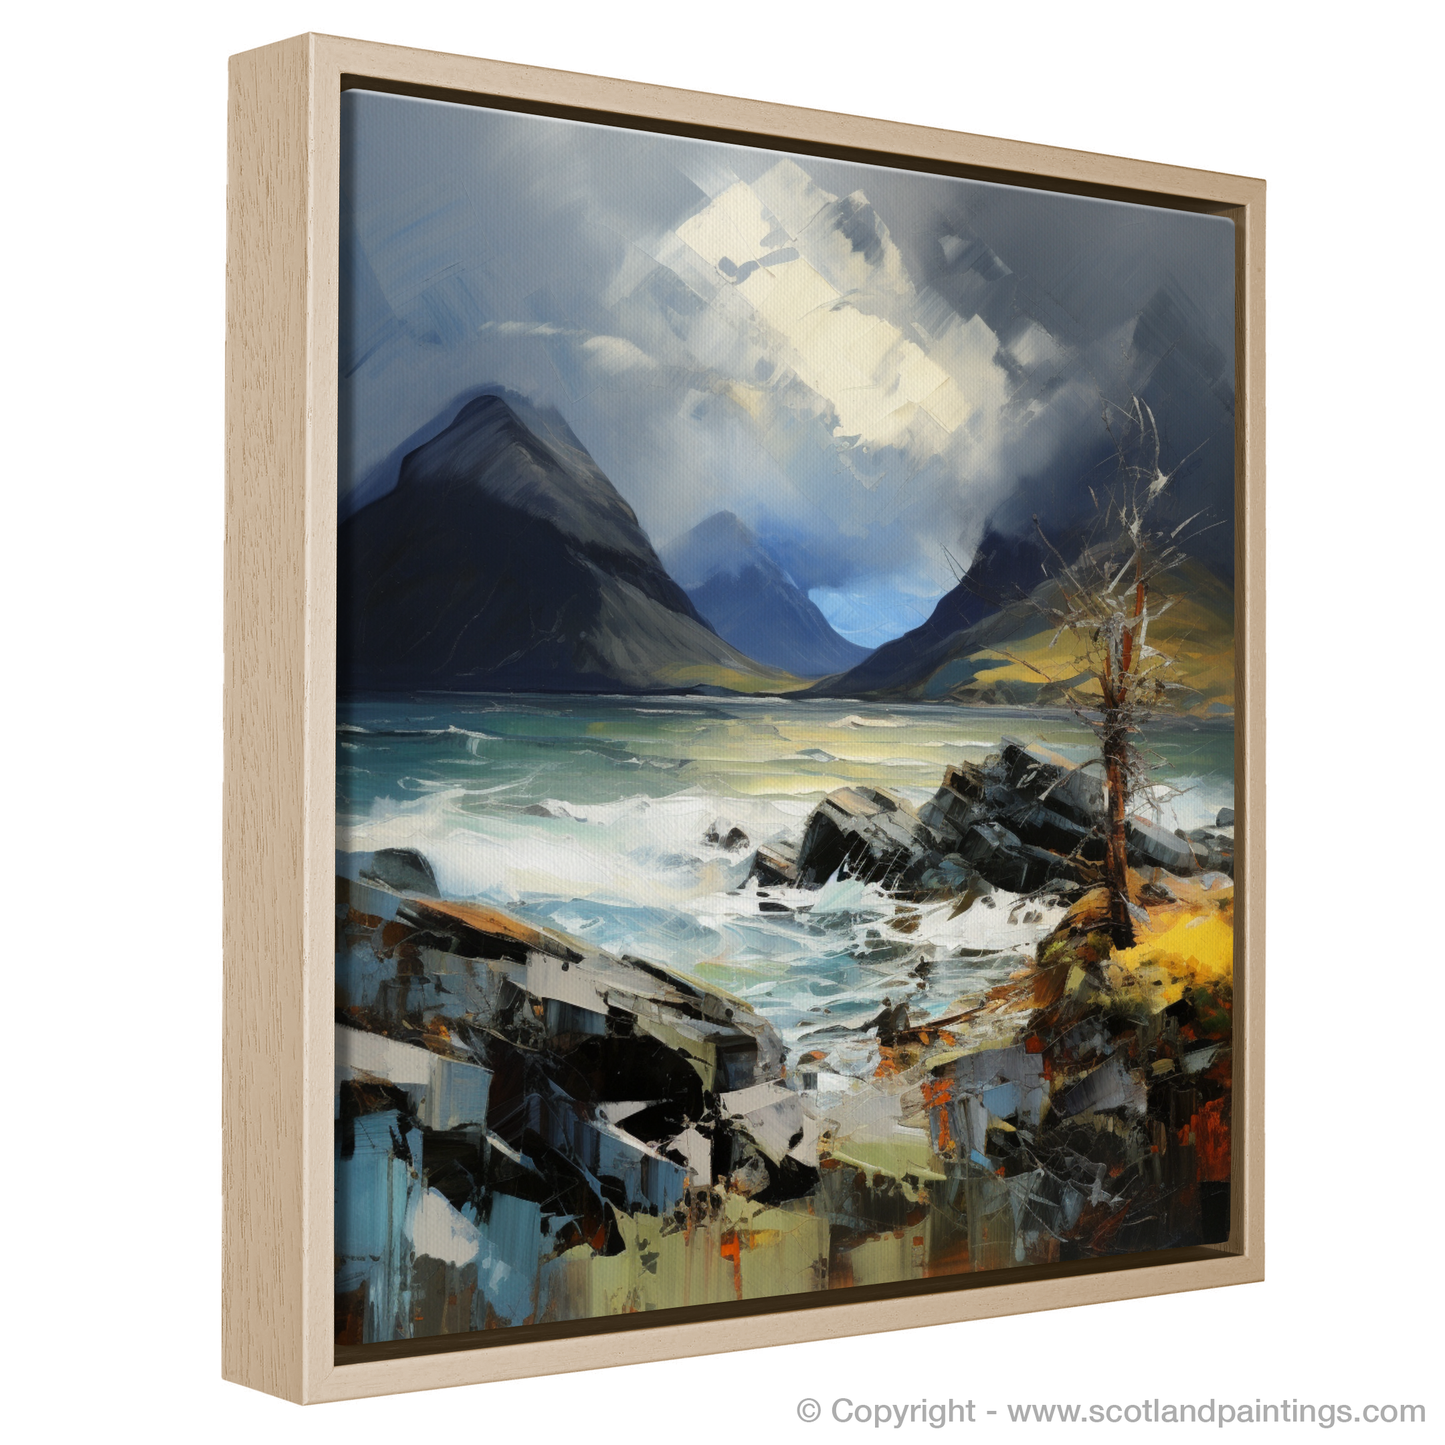 Painting and Art Print of Elgol Bay with a stormy sky entitled "Storm's Embrace at Elgol Bay".